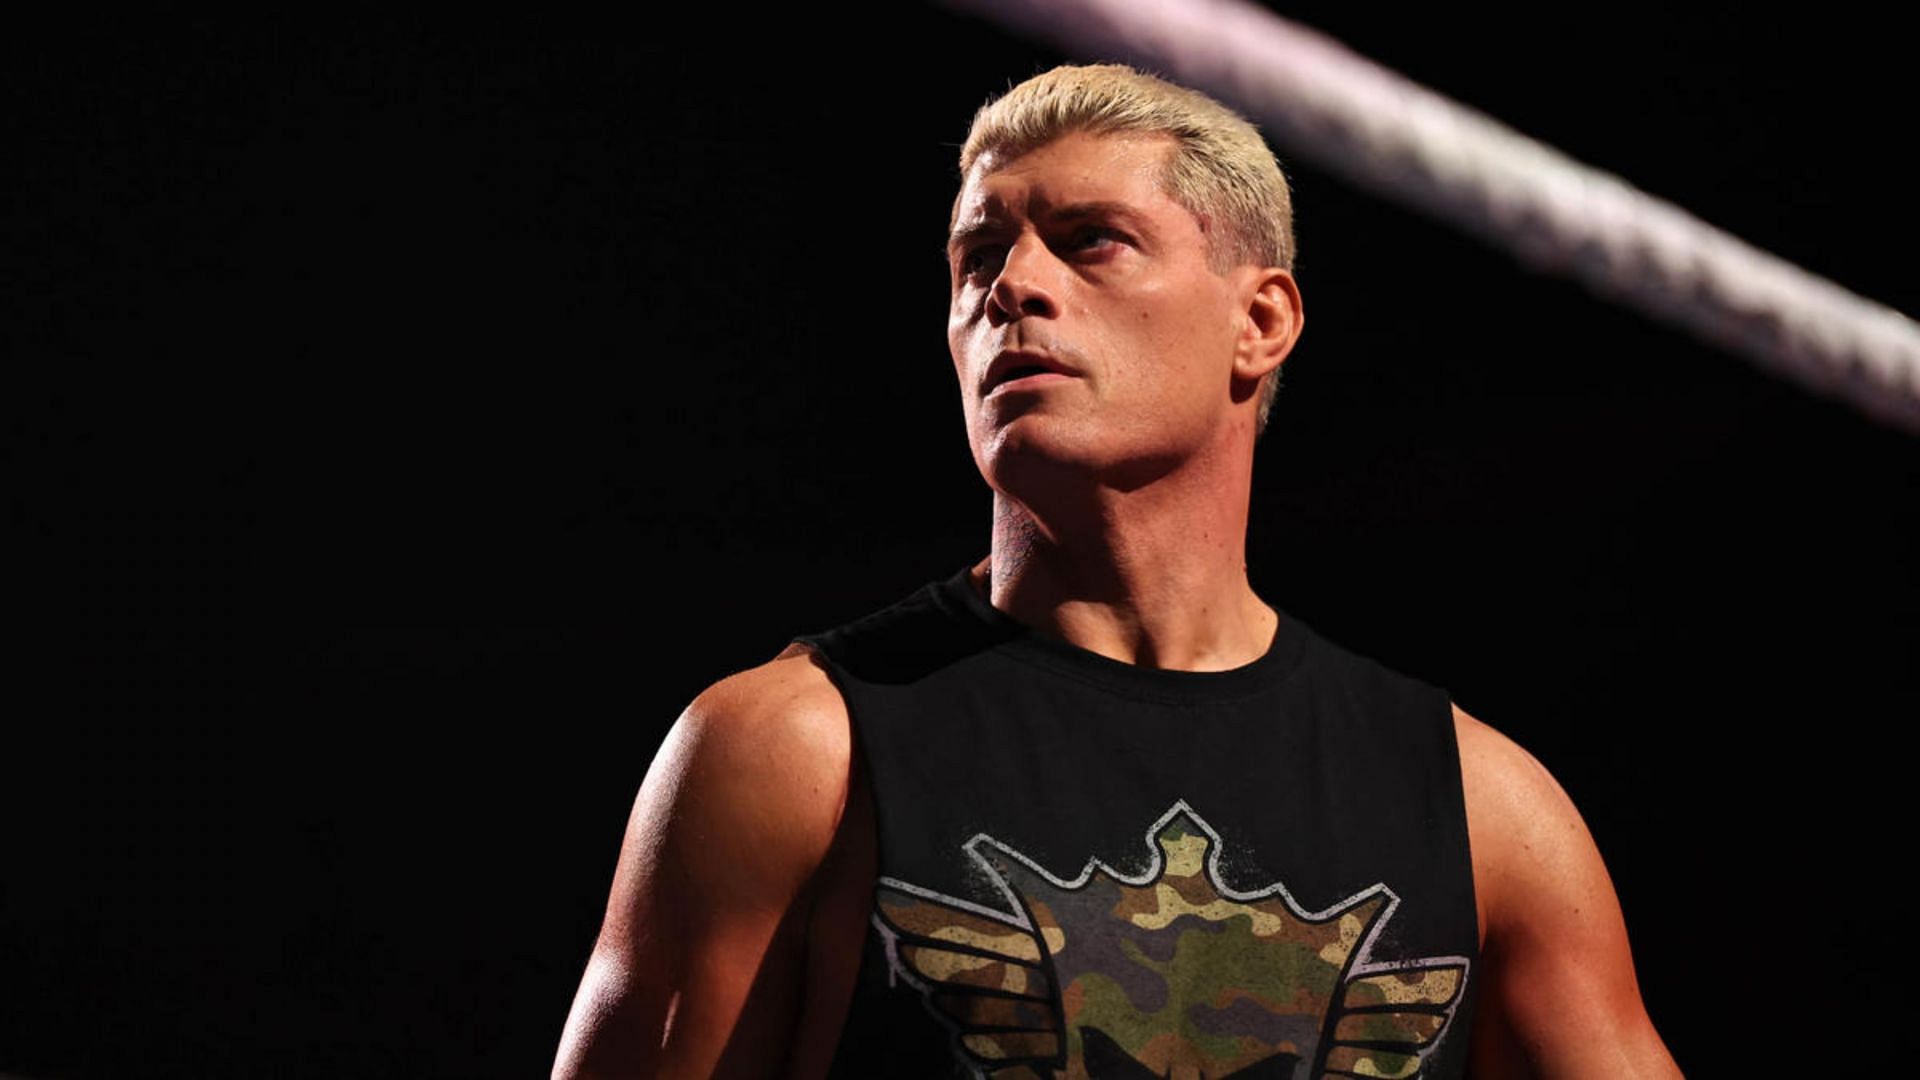 Who will Cody Rhodes face at WWE WrestleMania 40?